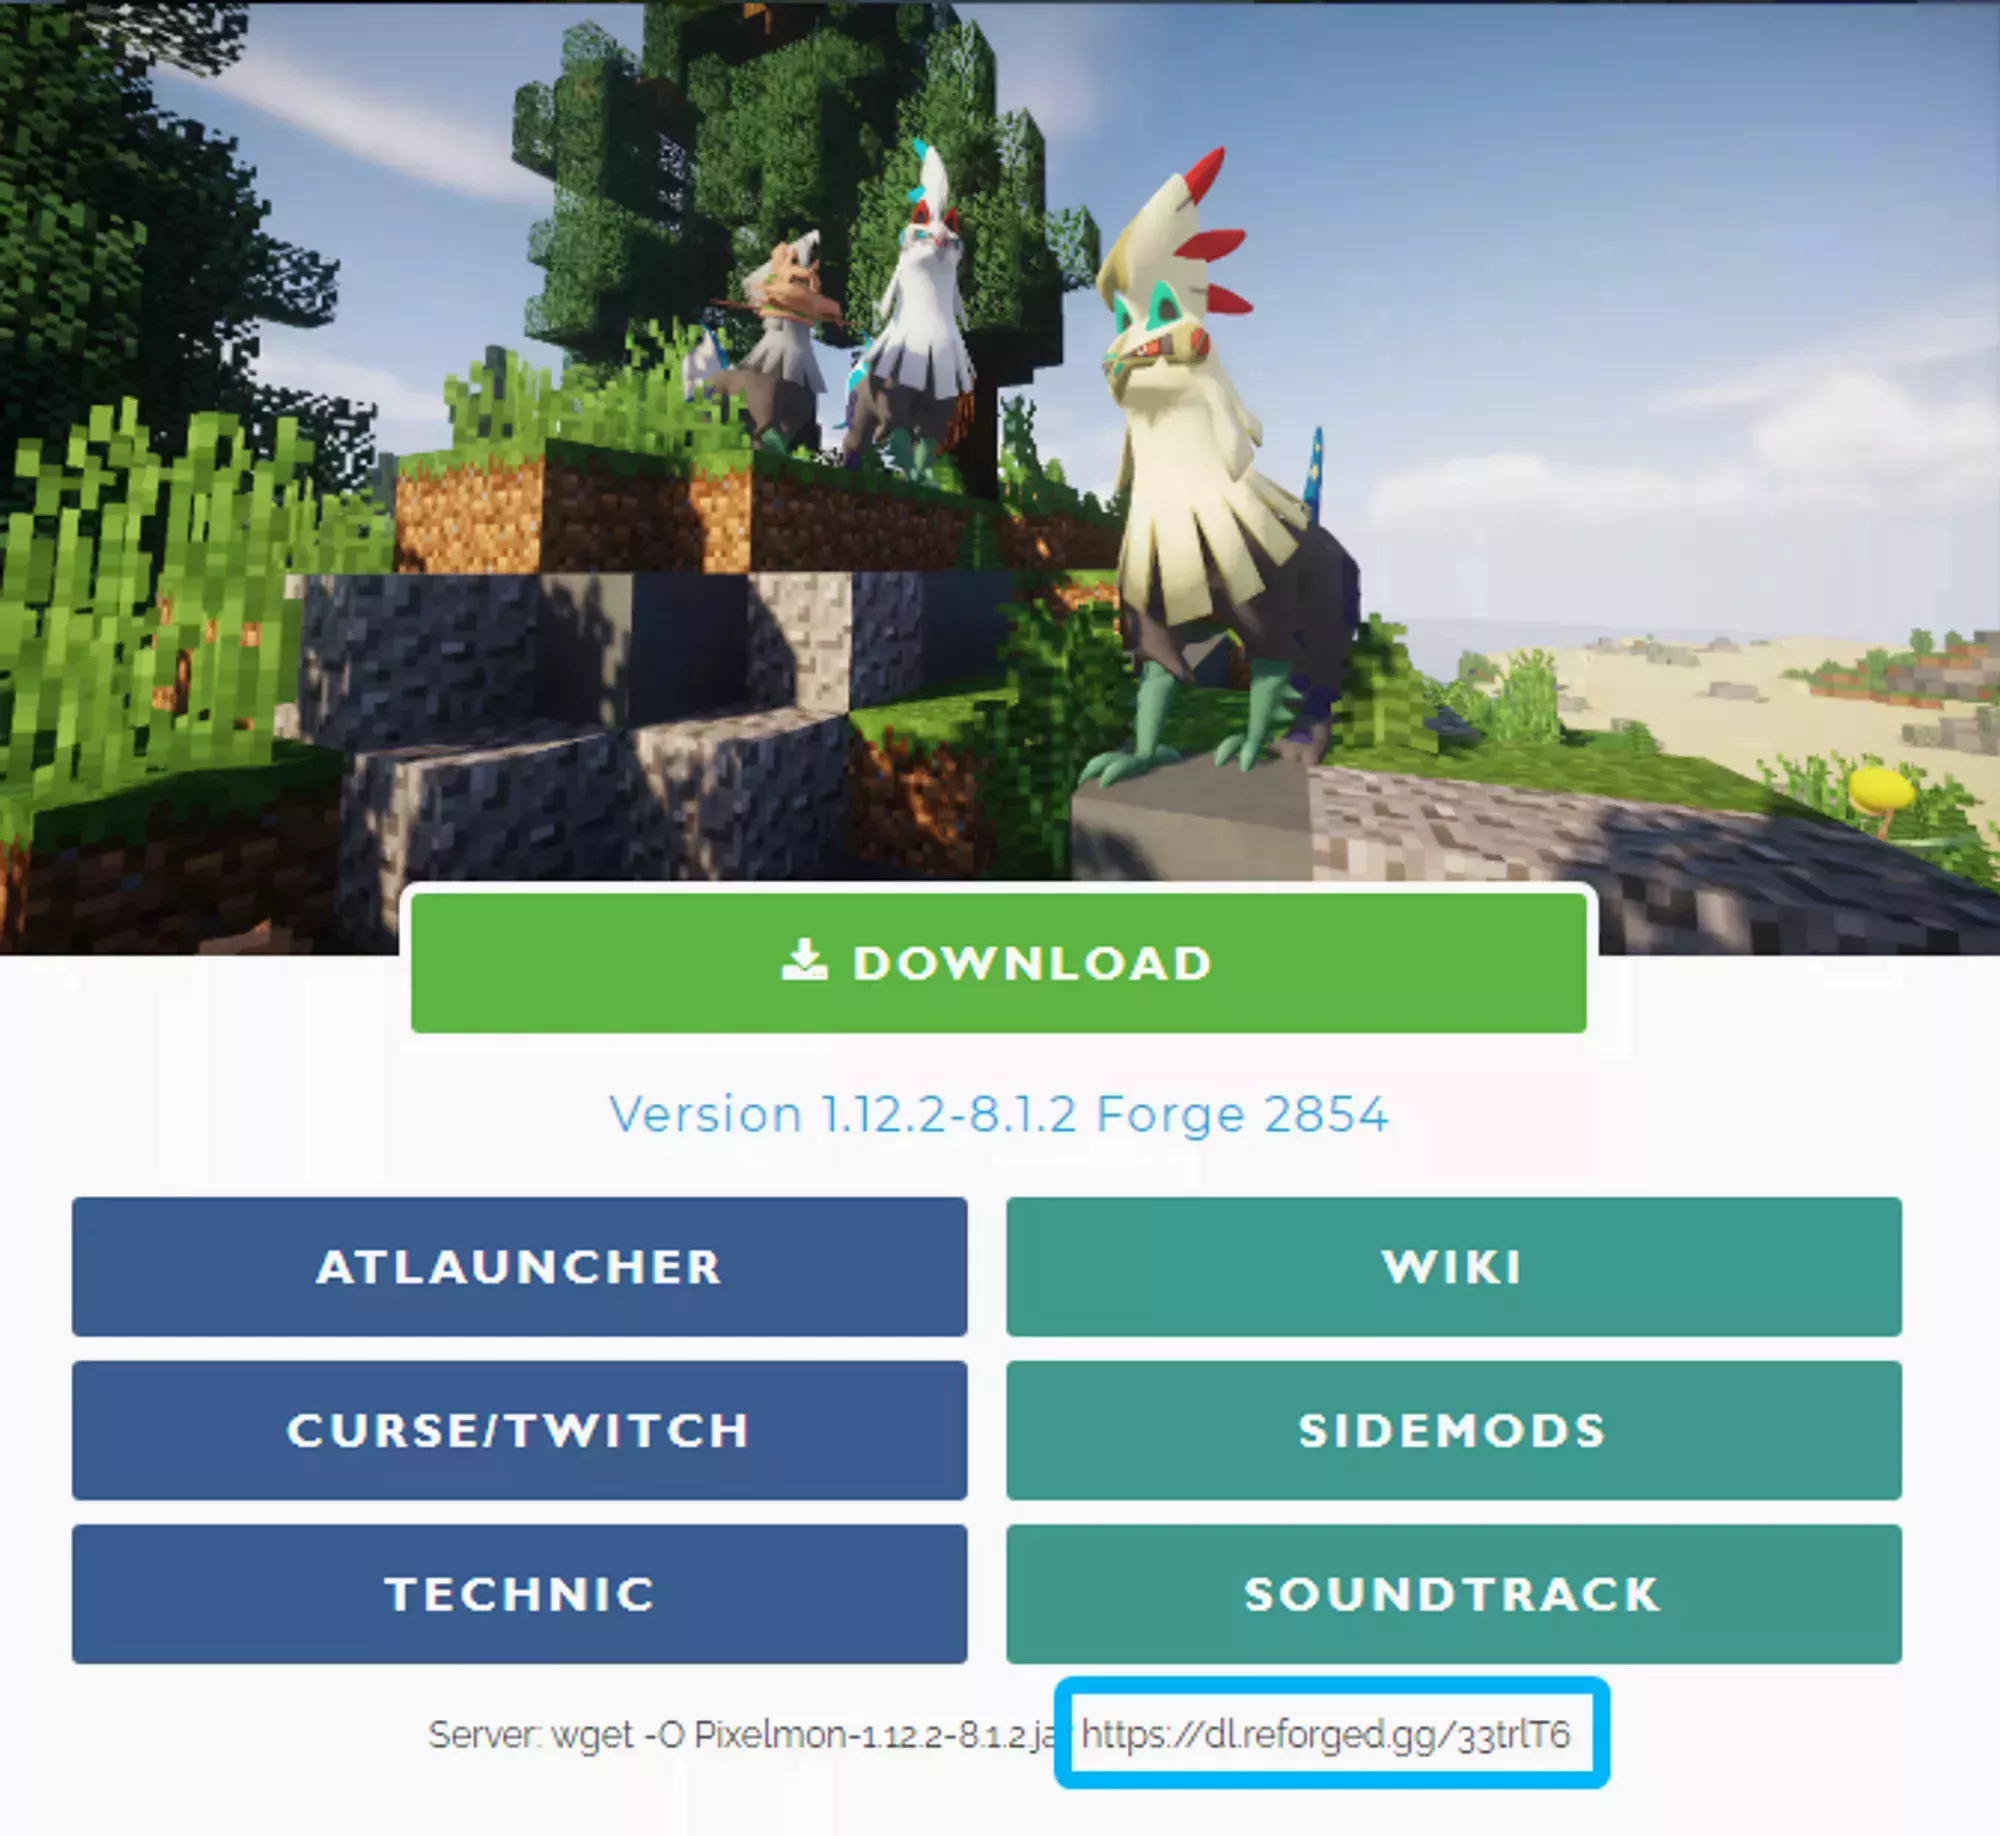 The Pixelmon download link located on the bottom of the Pixel mon landing page as part of a wget command